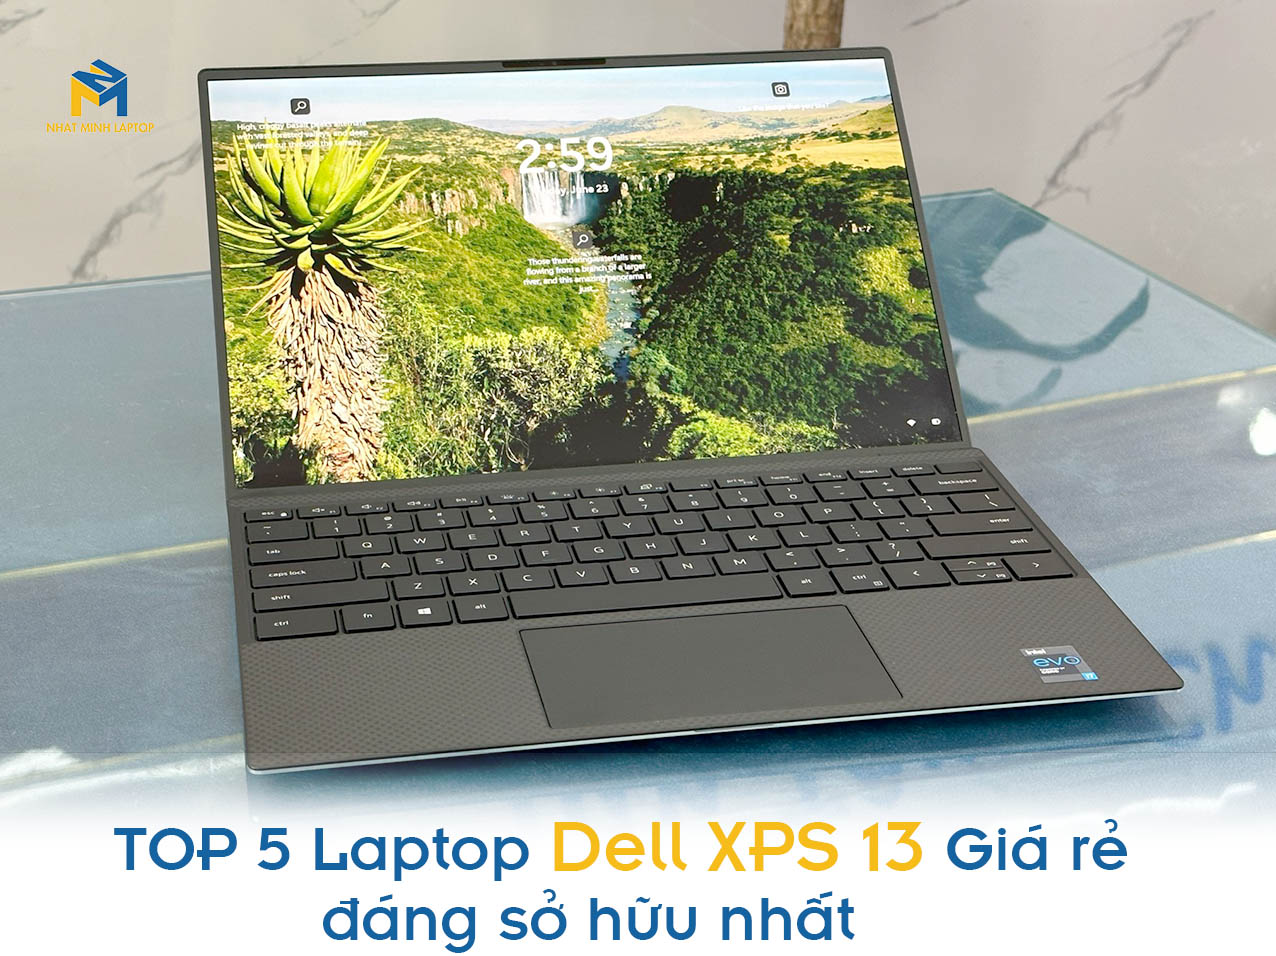 dell xps 13 cũ